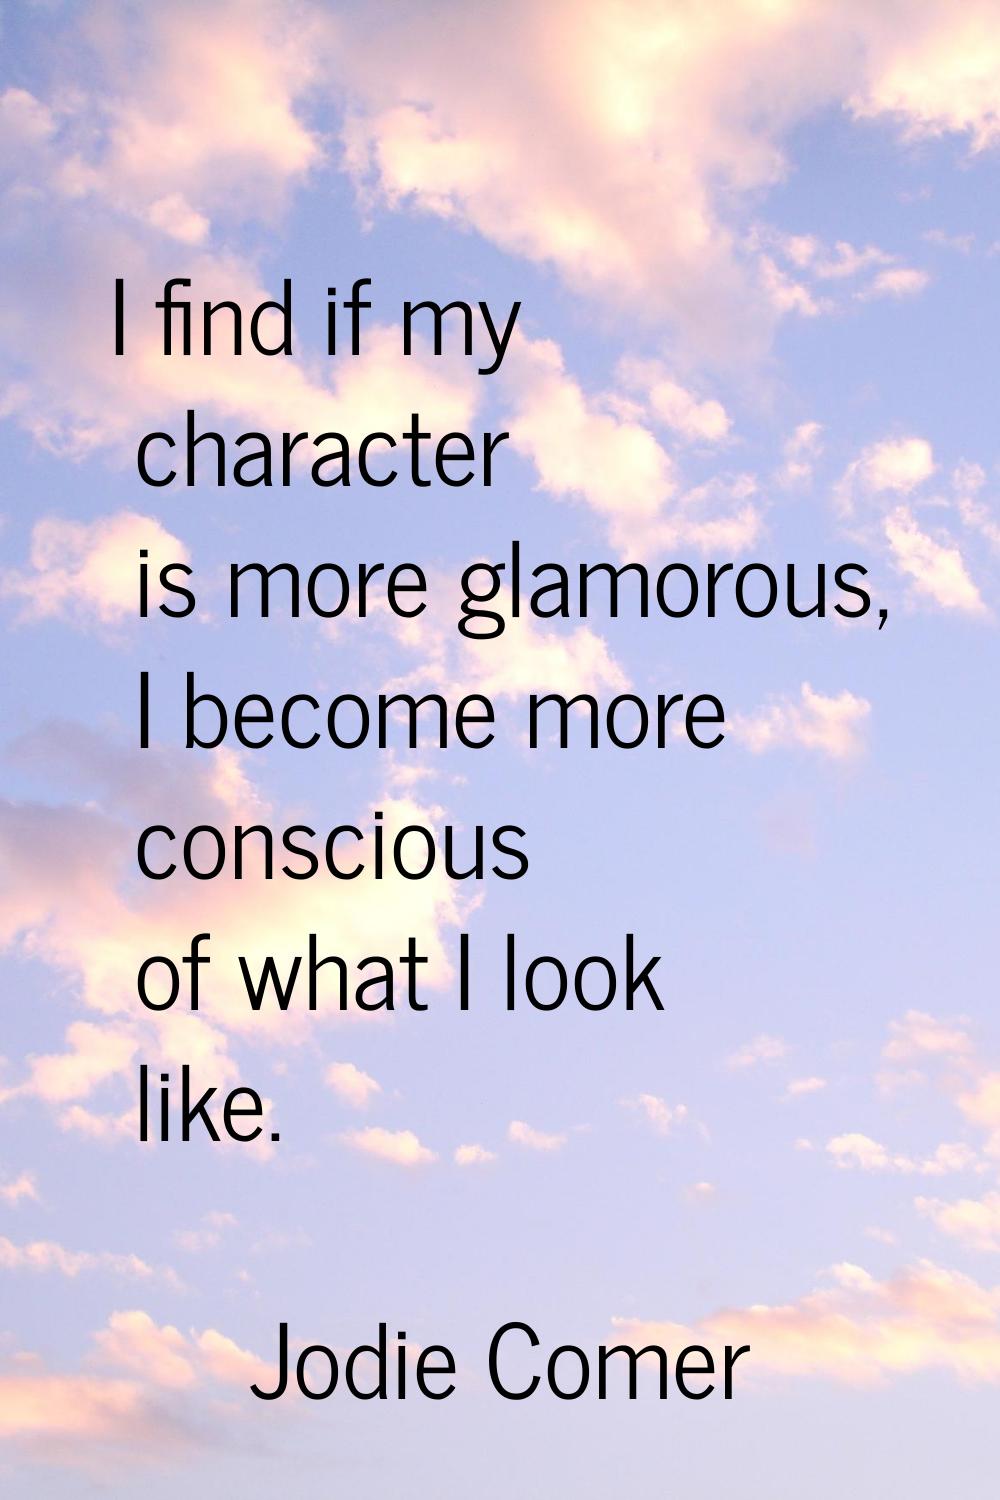 I find if my character is more glamorous, I become more conscious of what I look like.